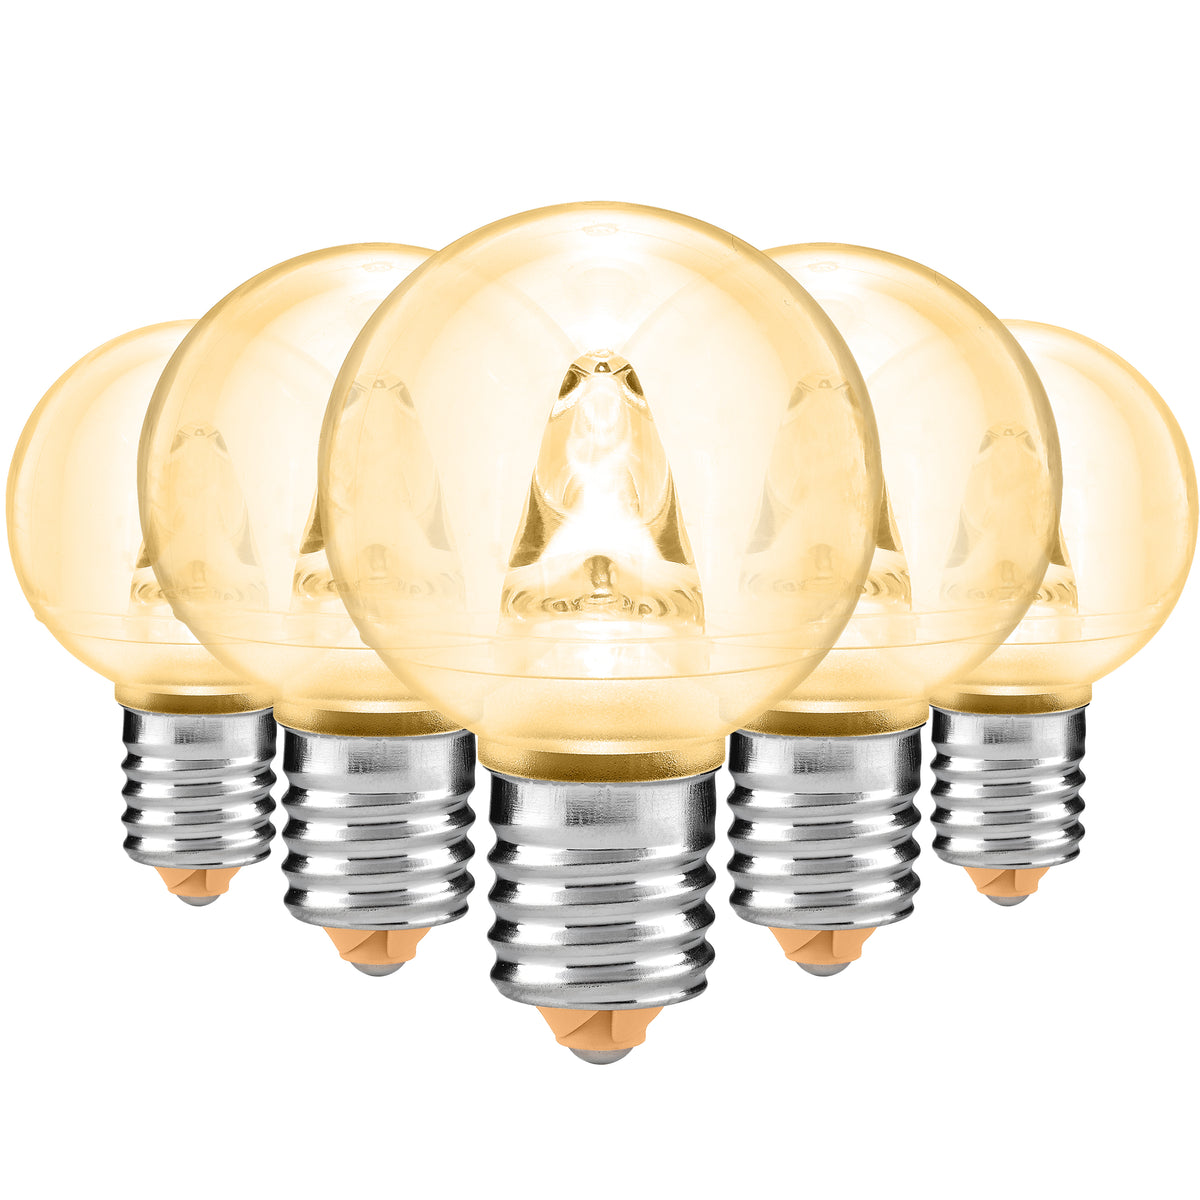 G40 LED Bistro Light Replacement Bulbs | C9